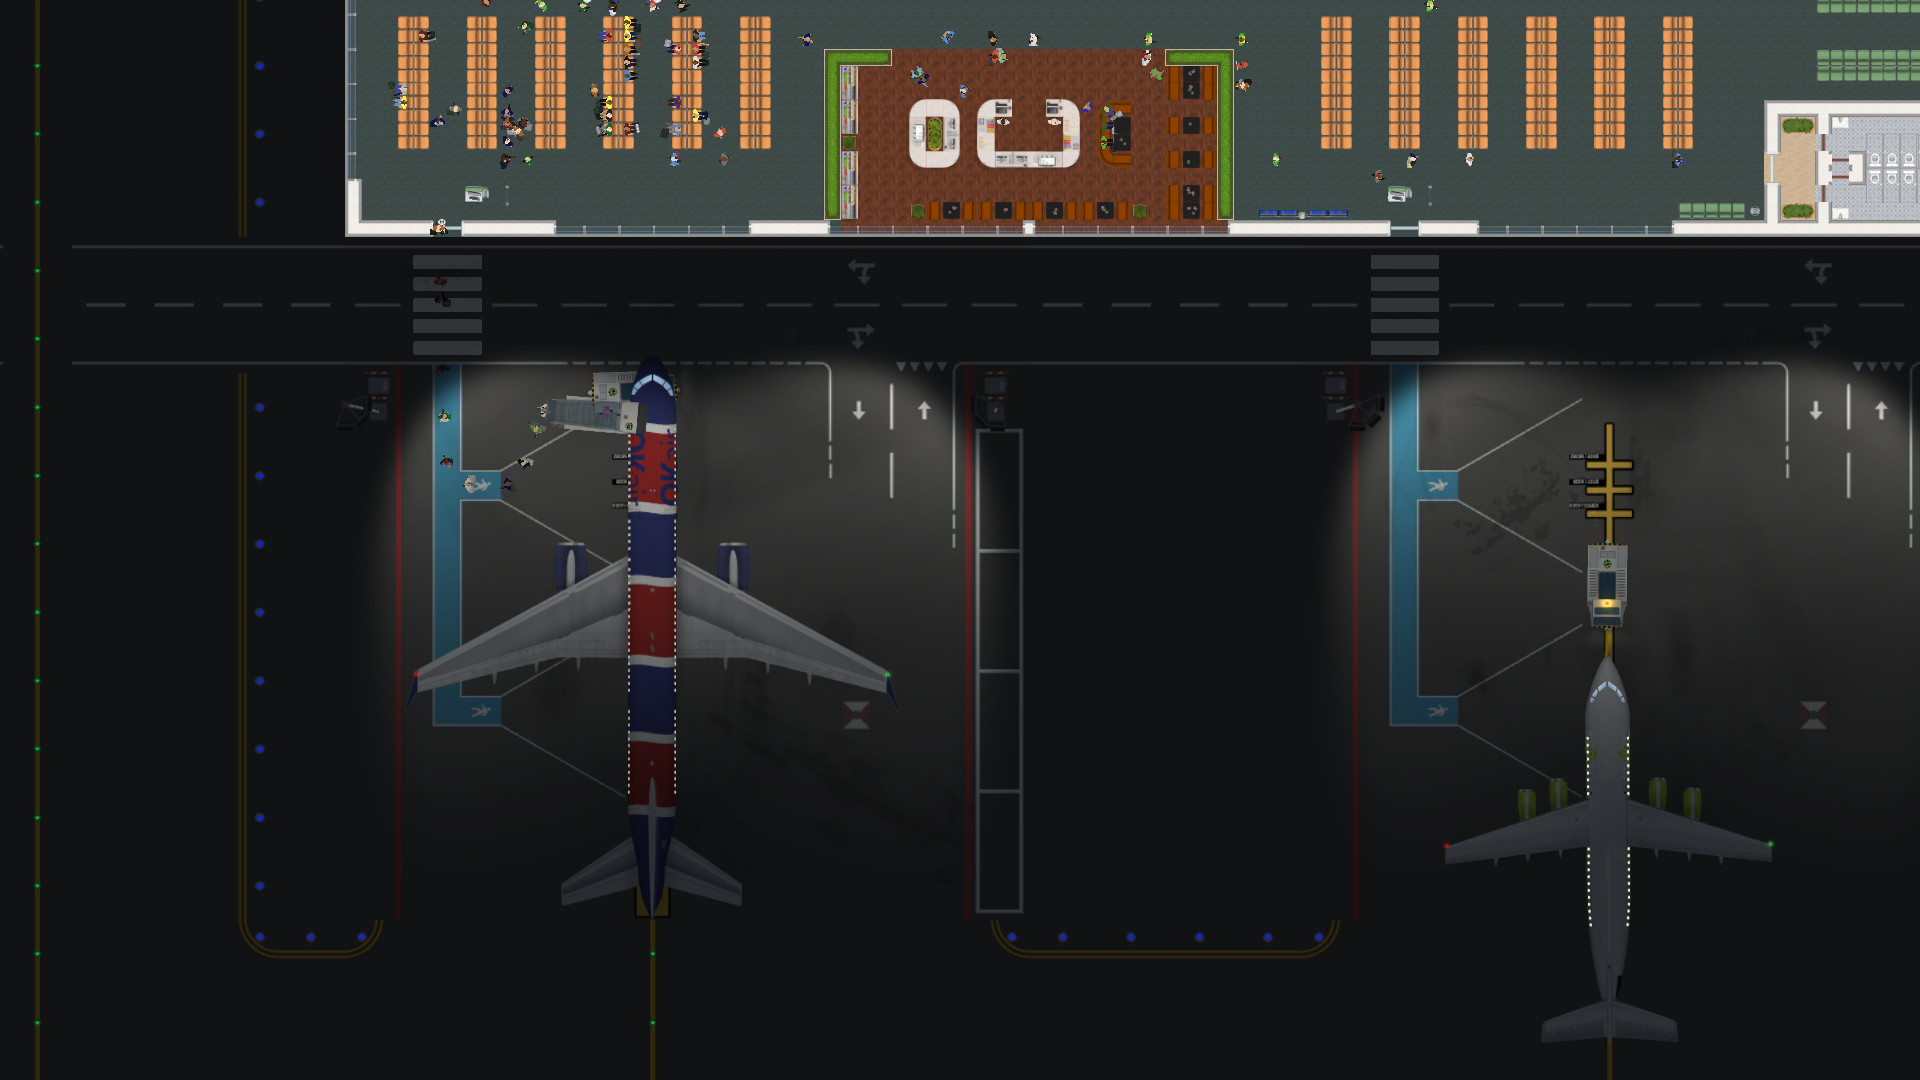 airport ceo game save download